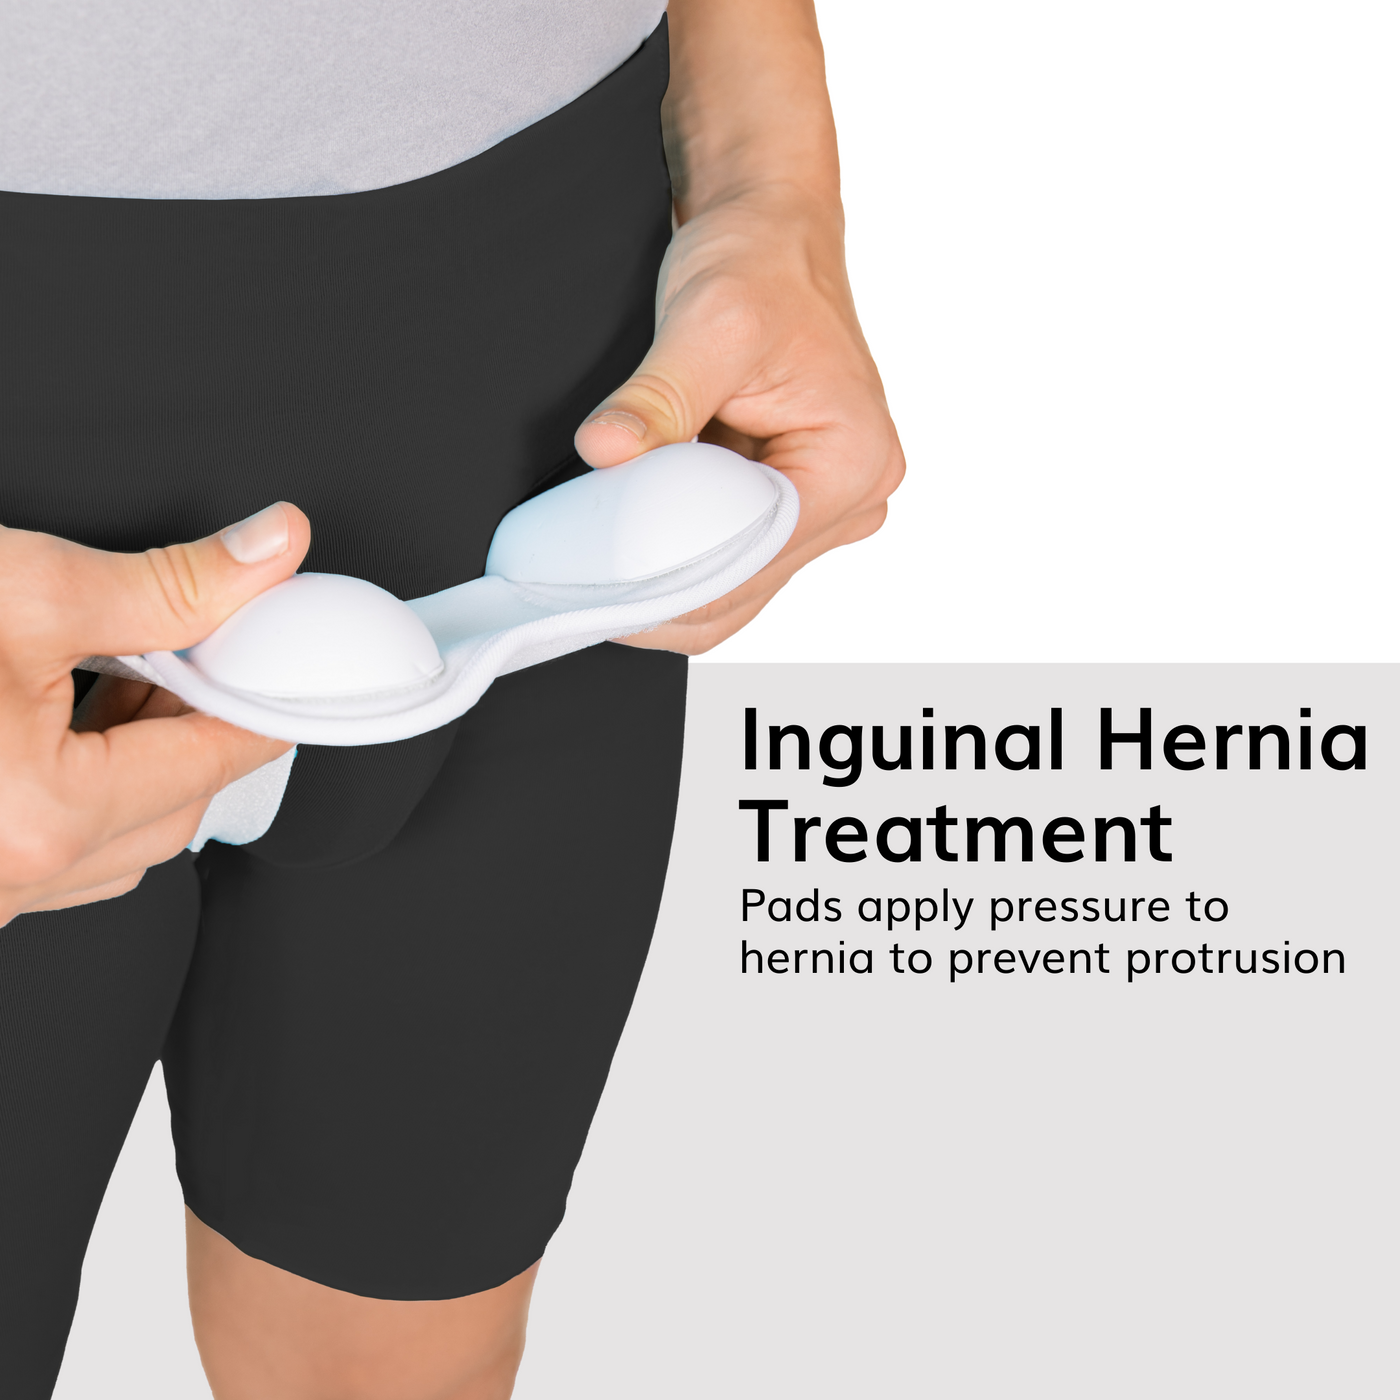 The adjustable pressure pads make this the best inguinal hernia treatment truss